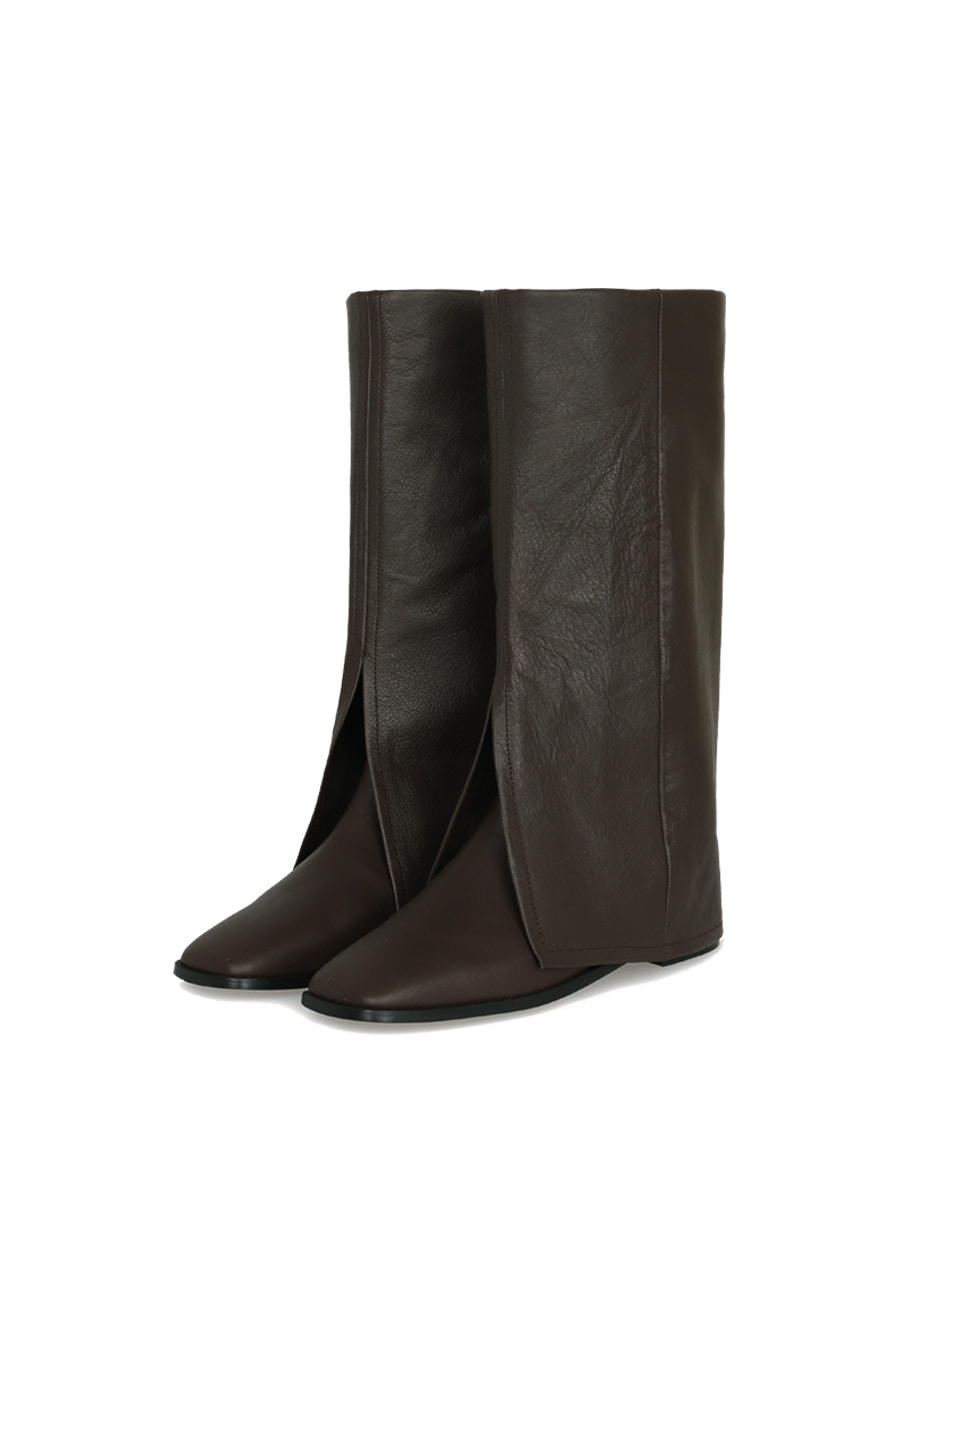 (ORDER-MADE) TWO-WAY LEATHER MID LENGTH BOOTS - BROWN